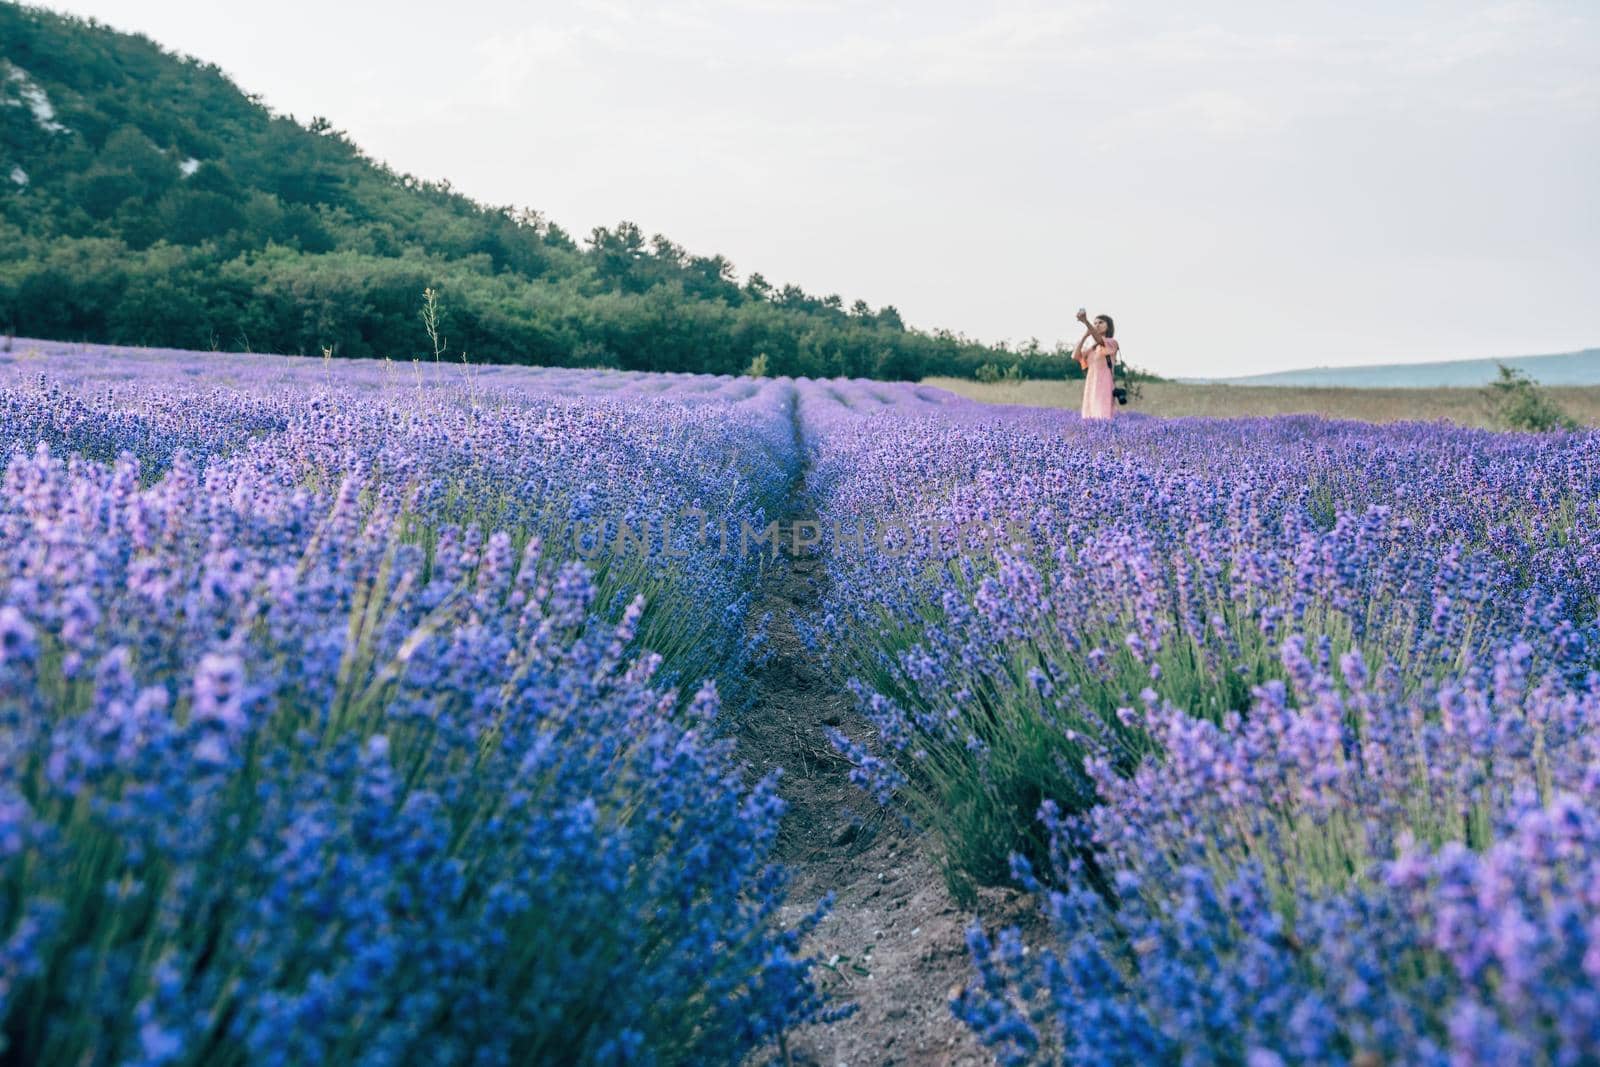 Close up Lavender flower blooming scented fields in endless rows on sunset. Selective focus on Bushes of Lavandula angustifolia purple aromatic flowers at lavender fields. Lavandula officinalis by panophotograph